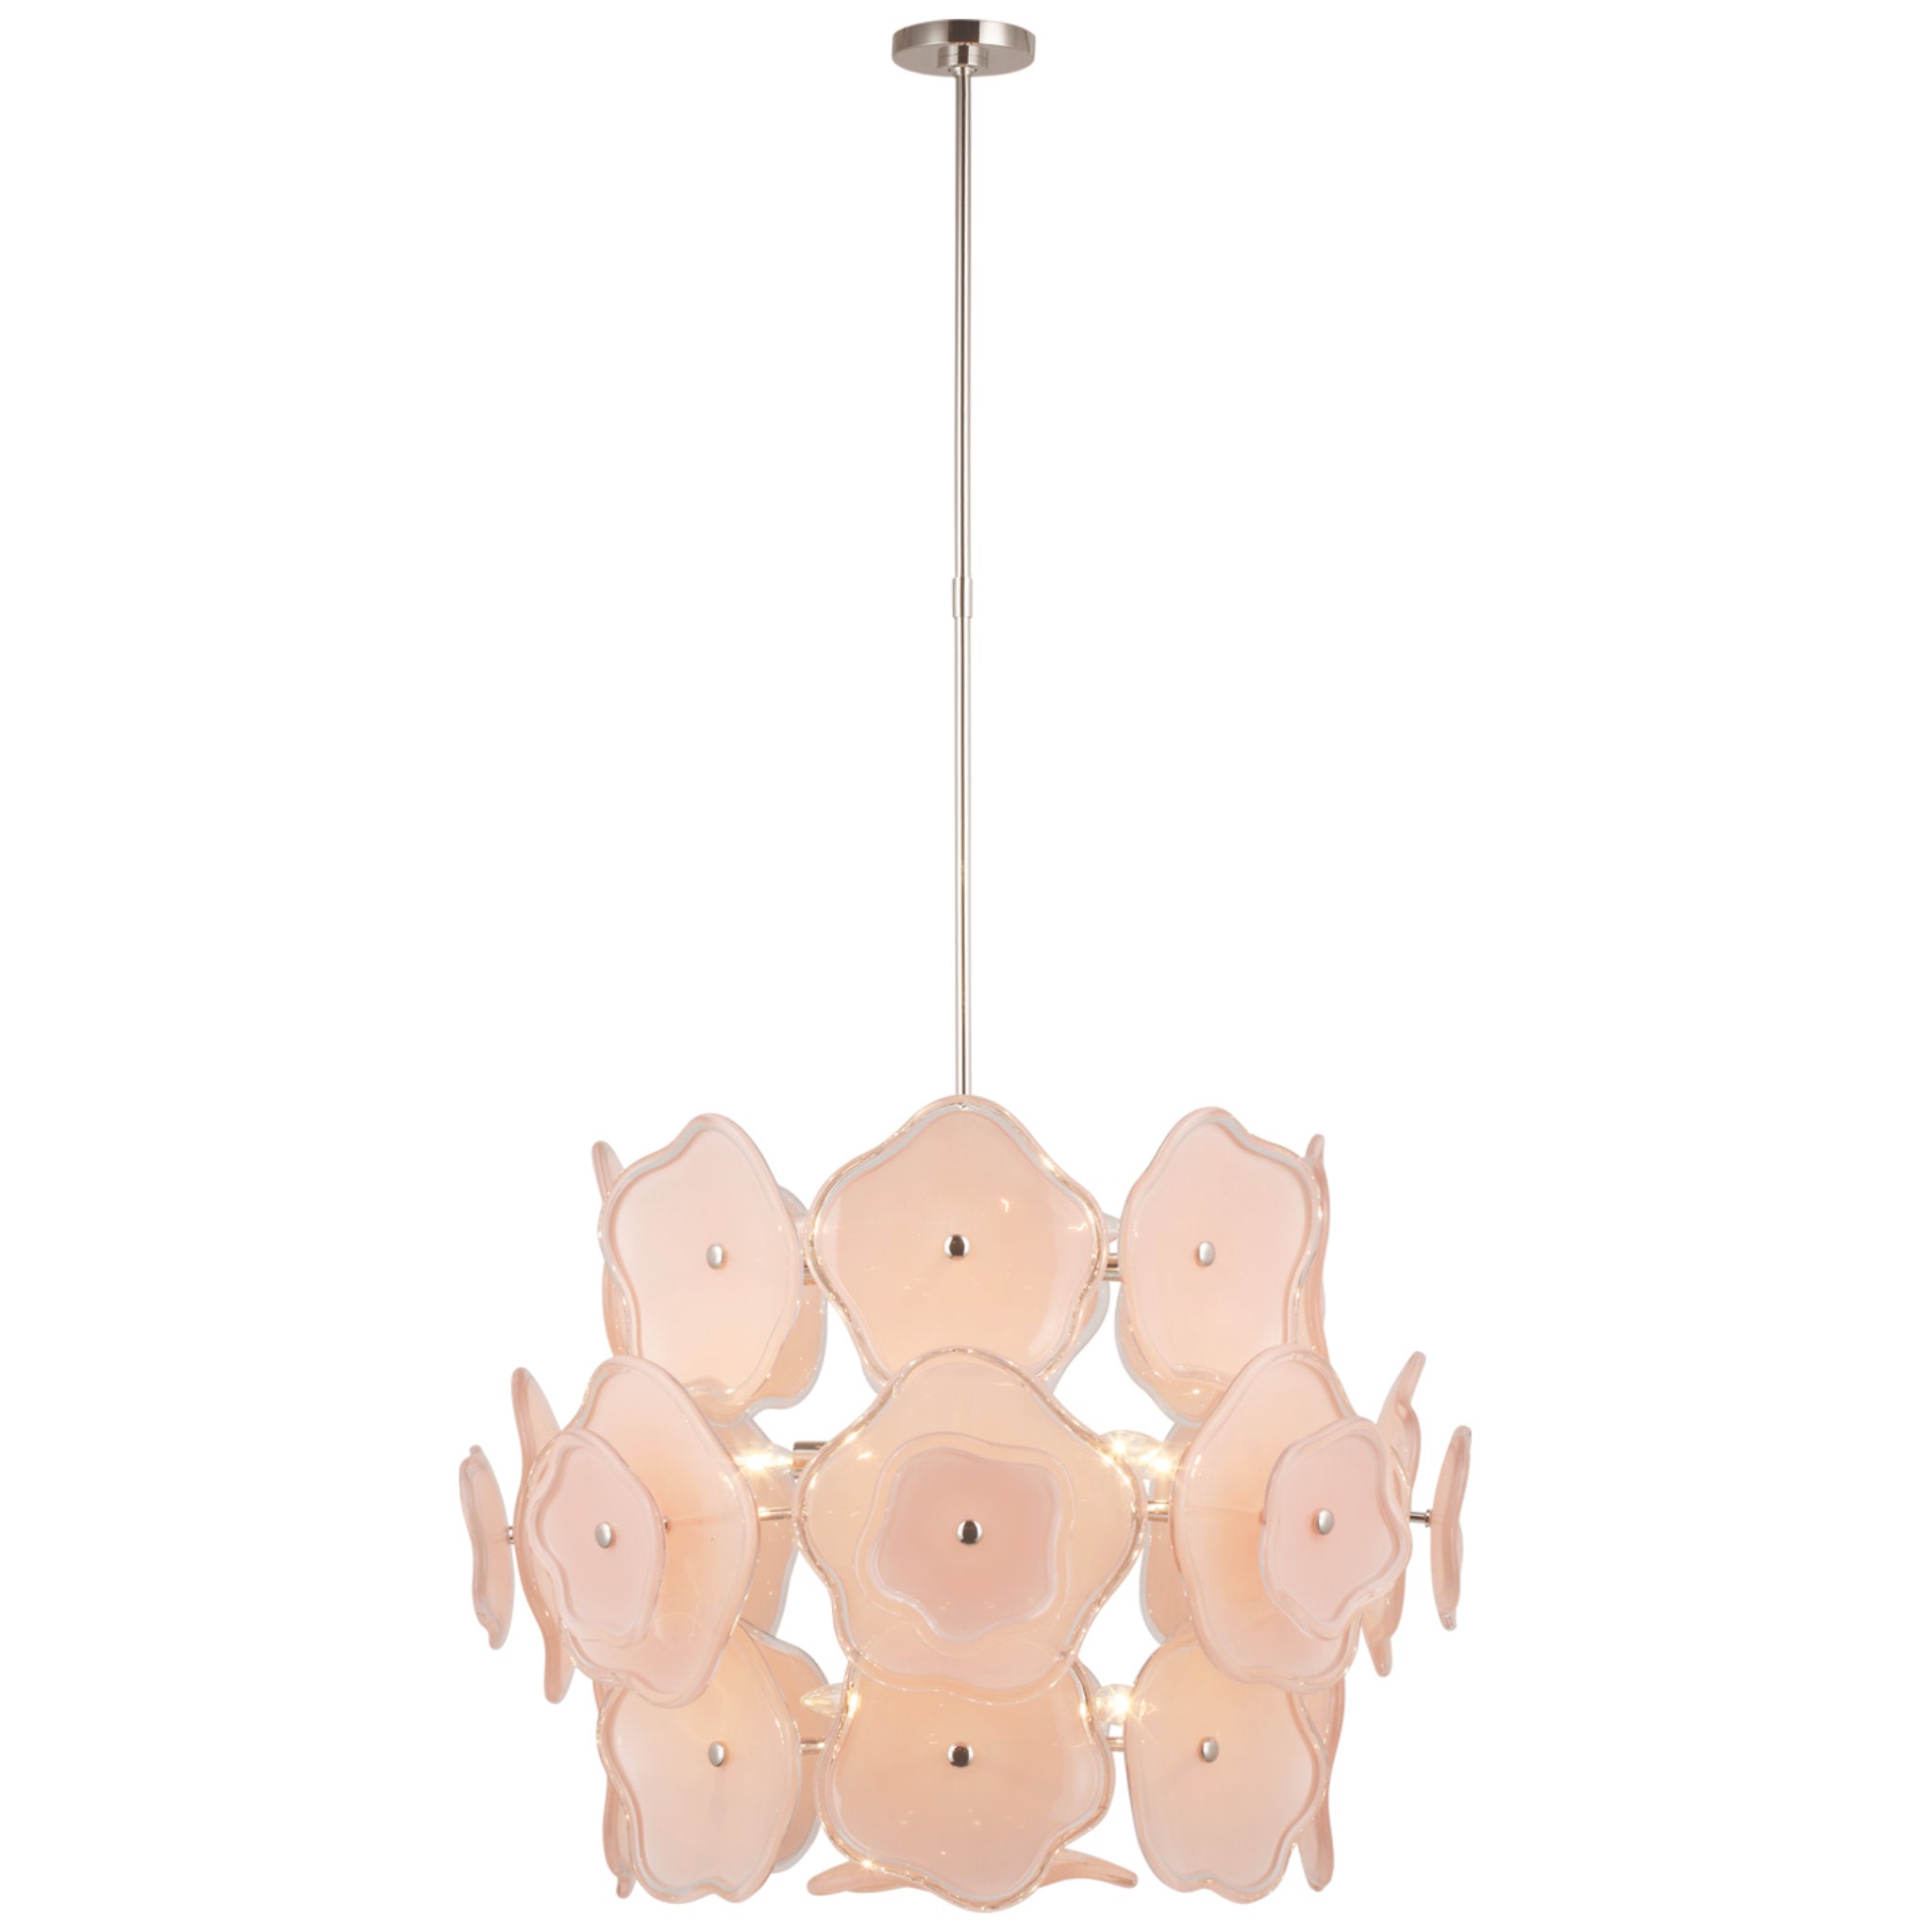 kate spade new york Leighton Large Barrel Chandelier in Polished Nickel with Blush Tinted Glass